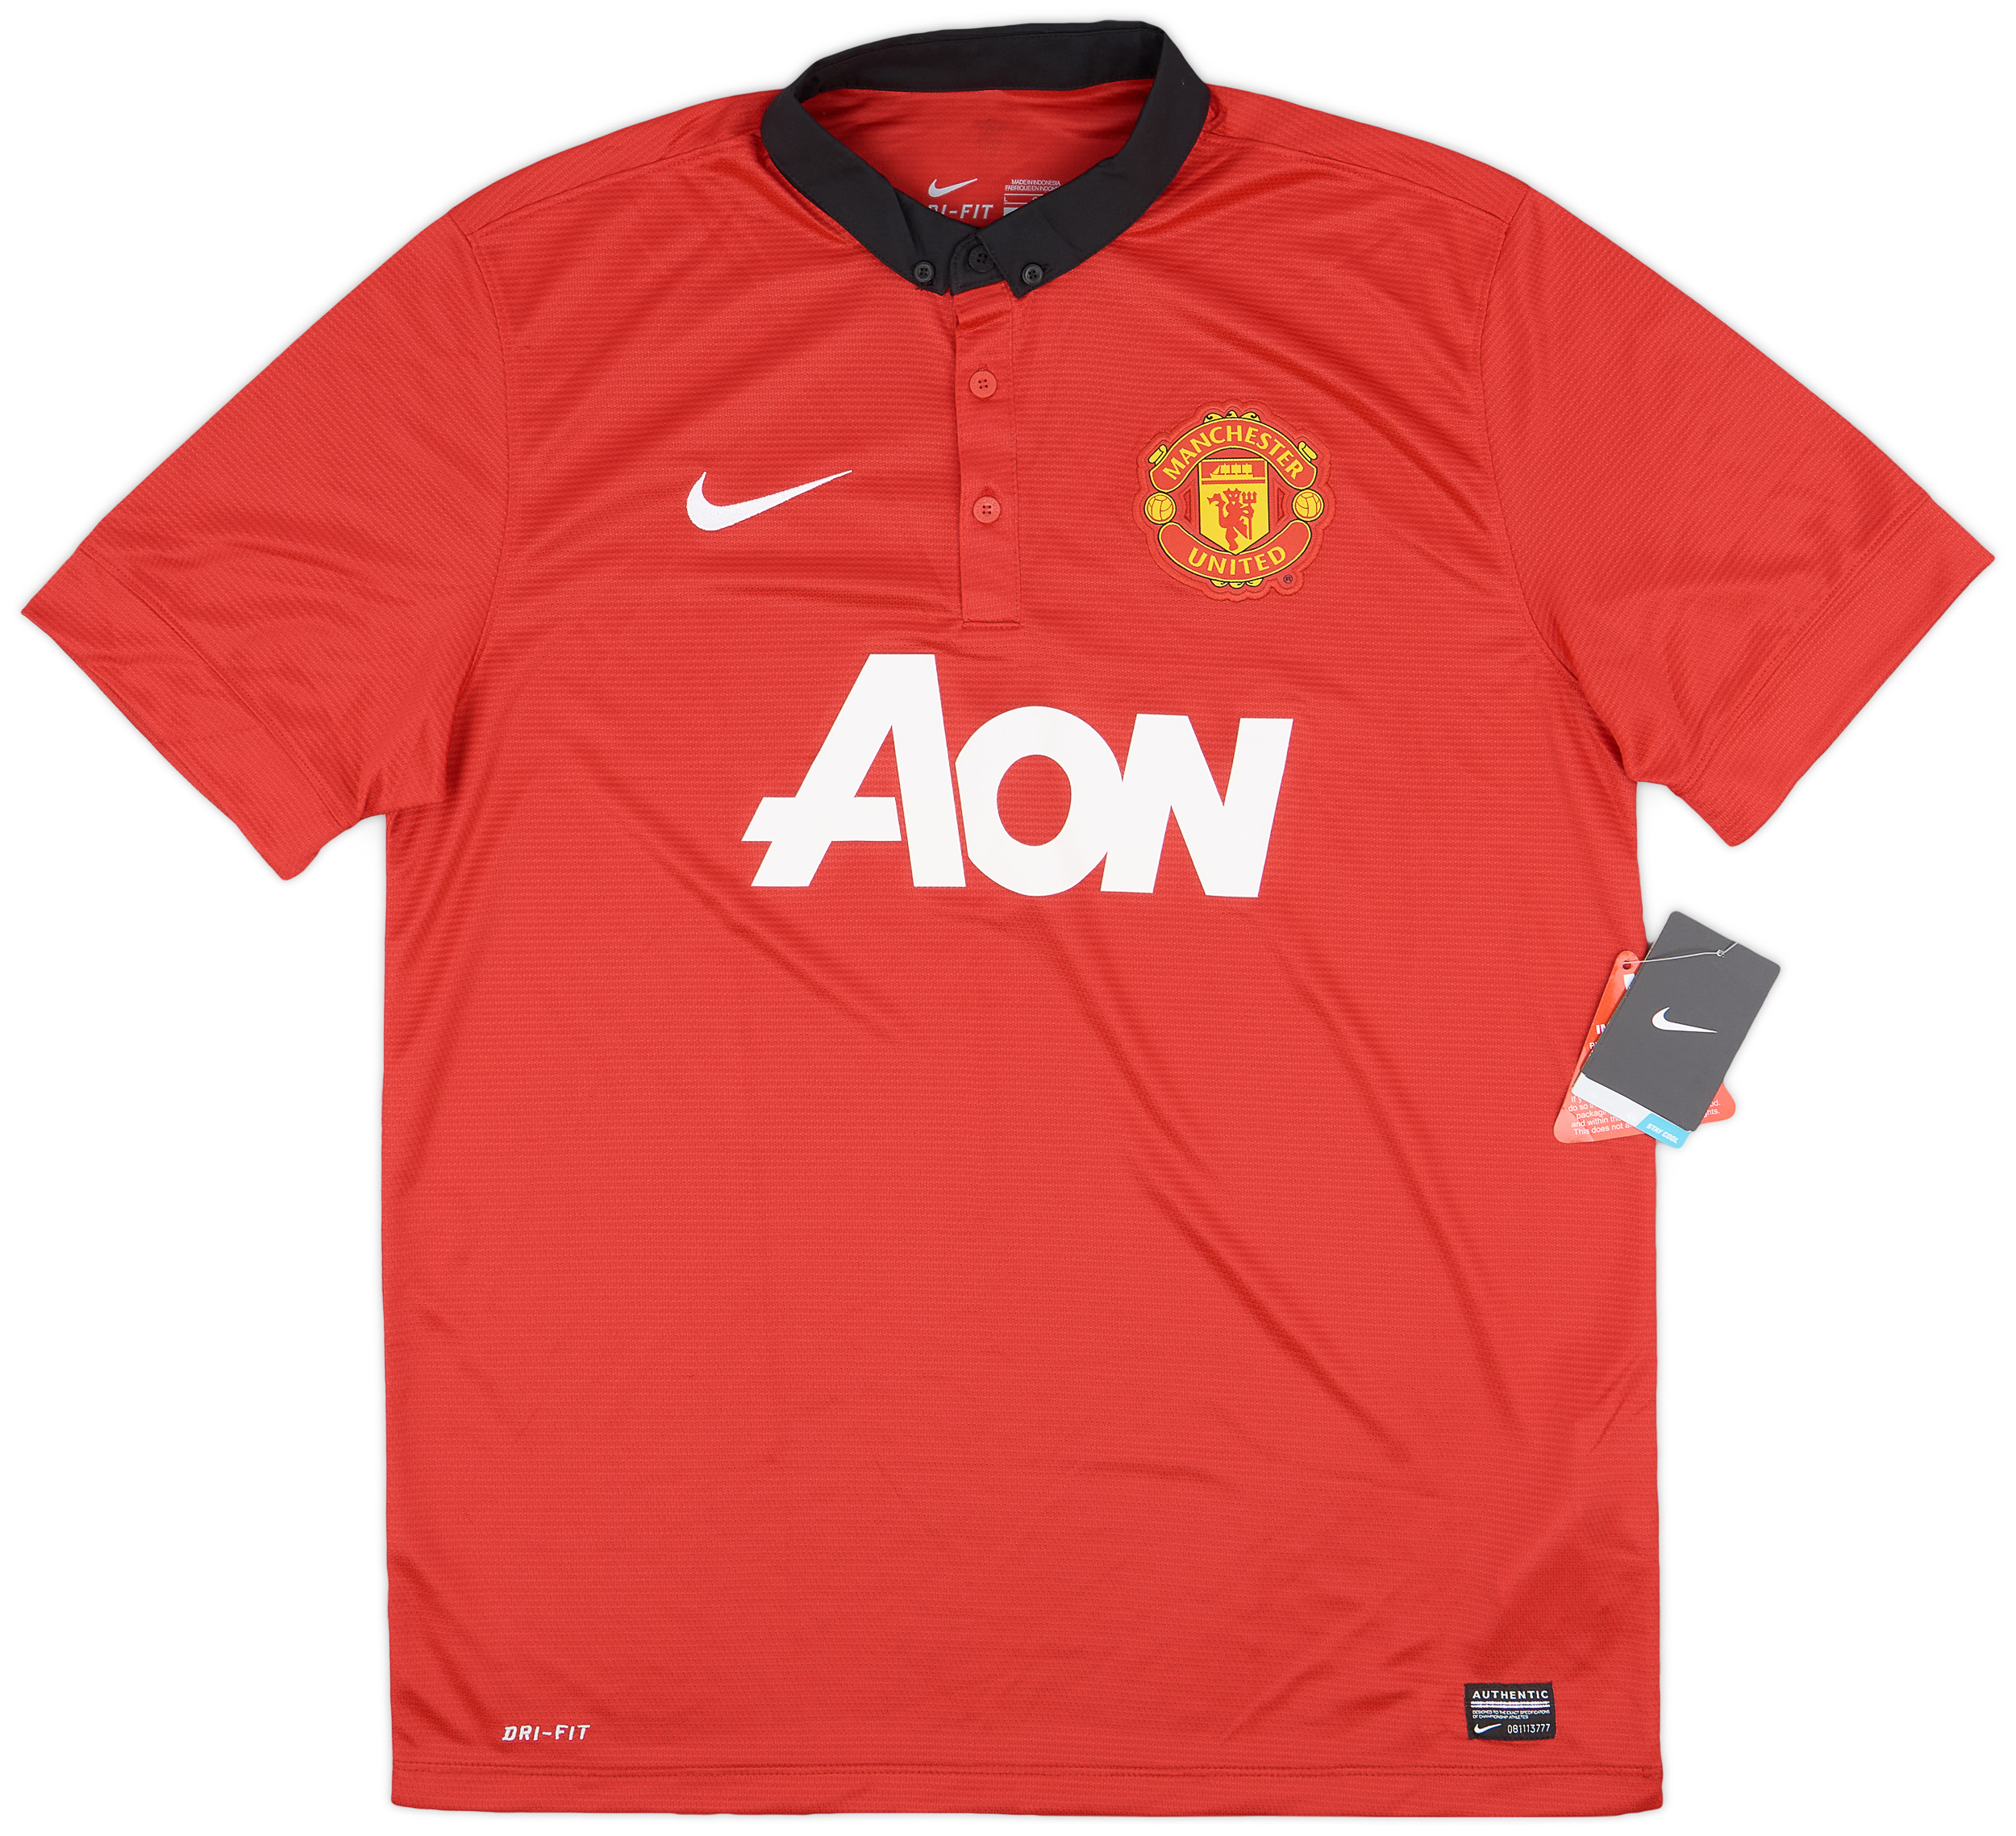 2013-14 Manchester United Home Shirt (L)